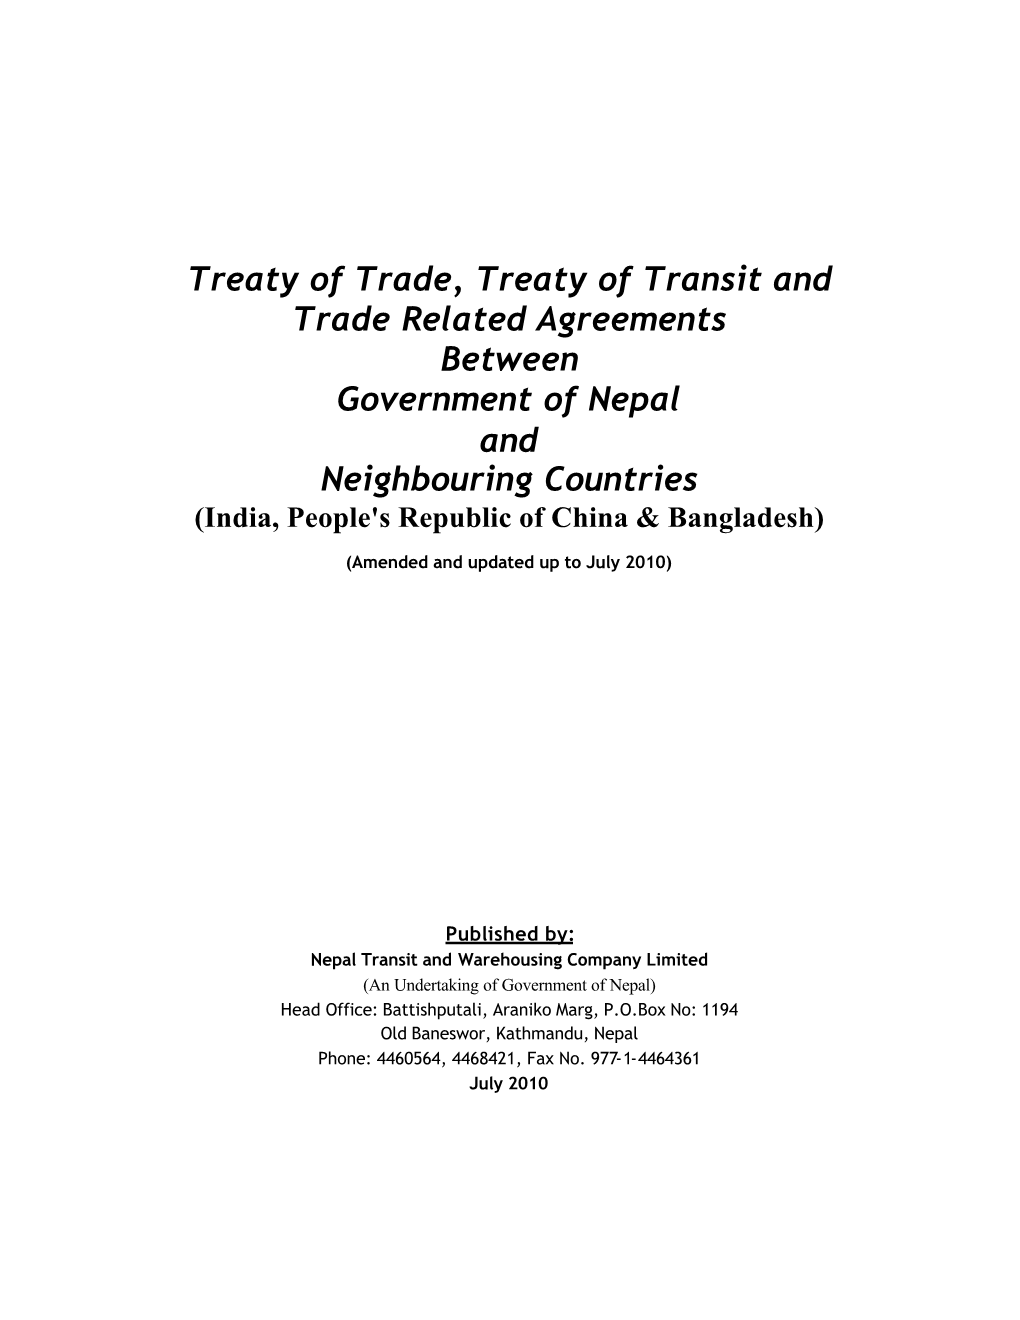 Treaty of Trade, Treaty of Transit and Trade Related Agreements